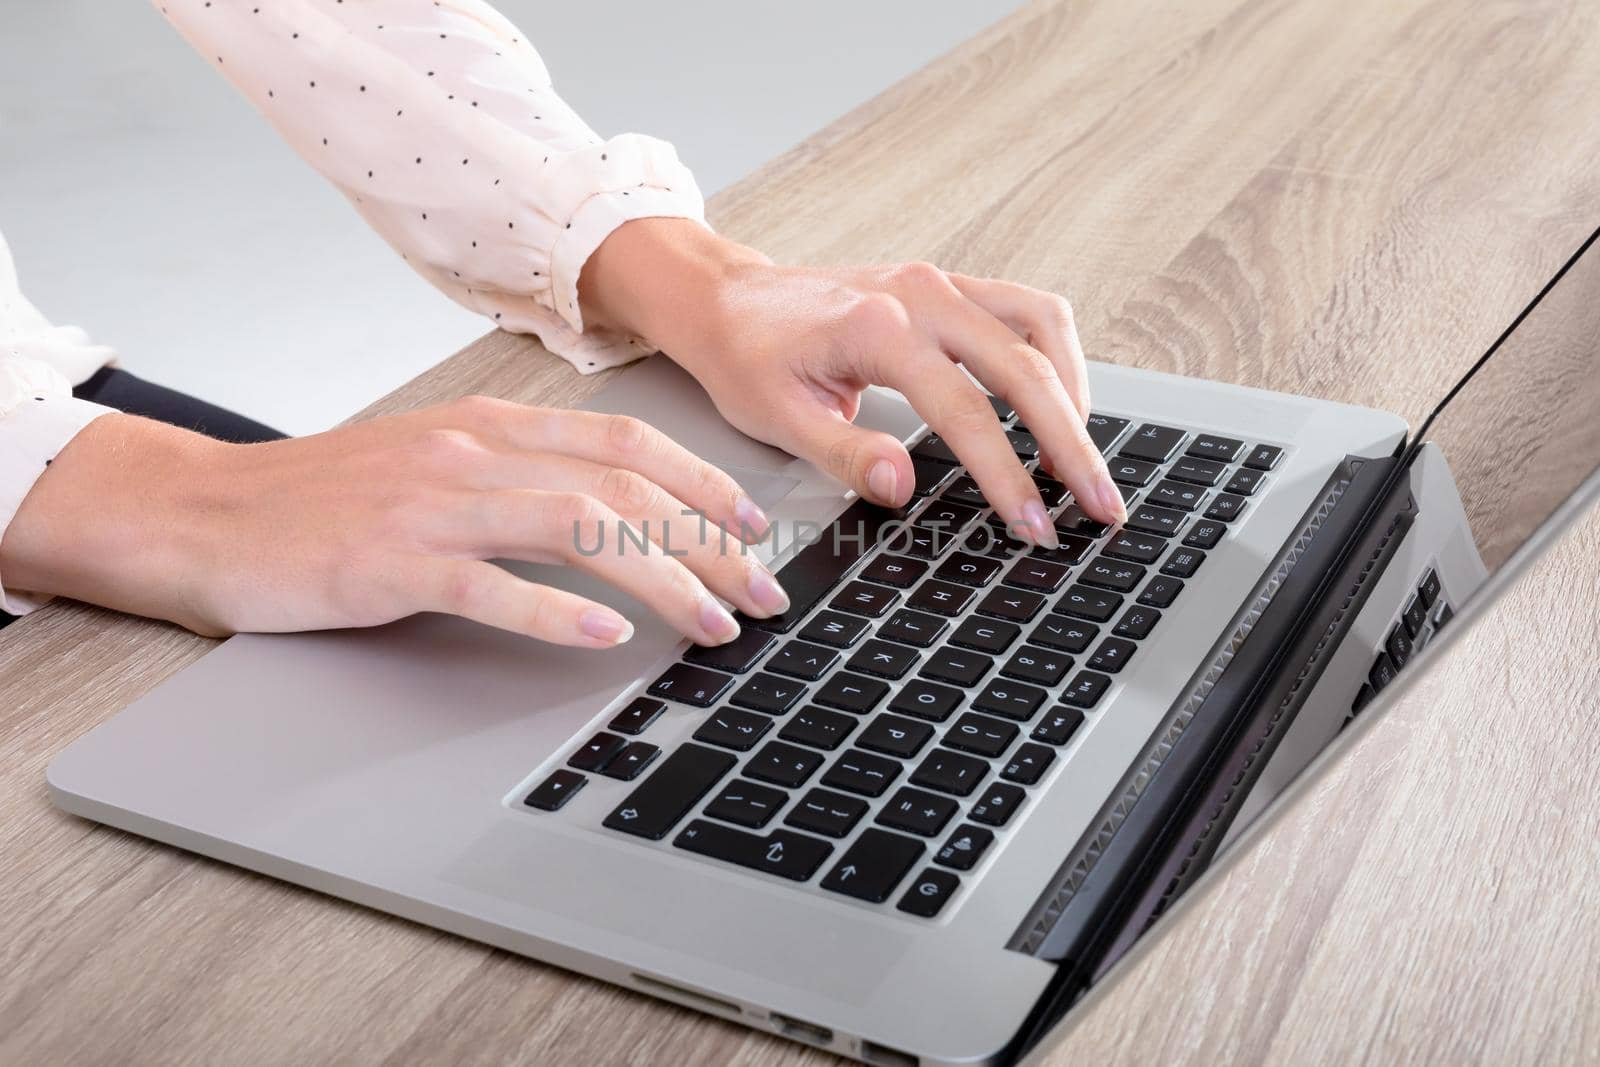 Midsection of caucasian businesswoman typing on keyboard, isolated on grey background. business, technology, communication and growth concept.